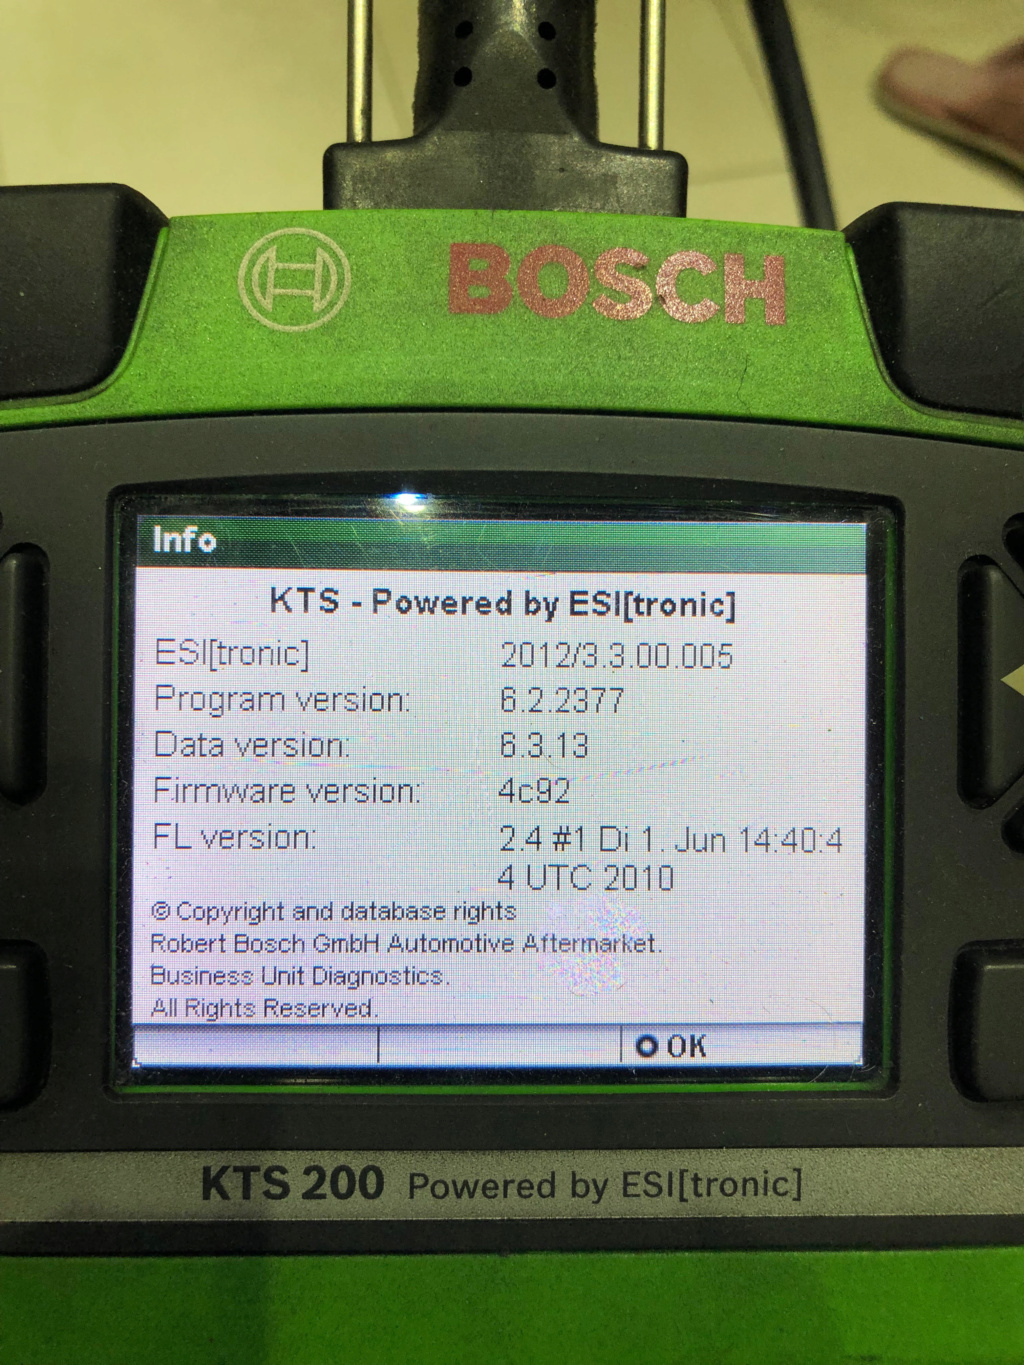 Bosch ESI[tronic] 2Q.2014 v1.0 UPDATE +Activation KEY FREE - Page 6 Unname10